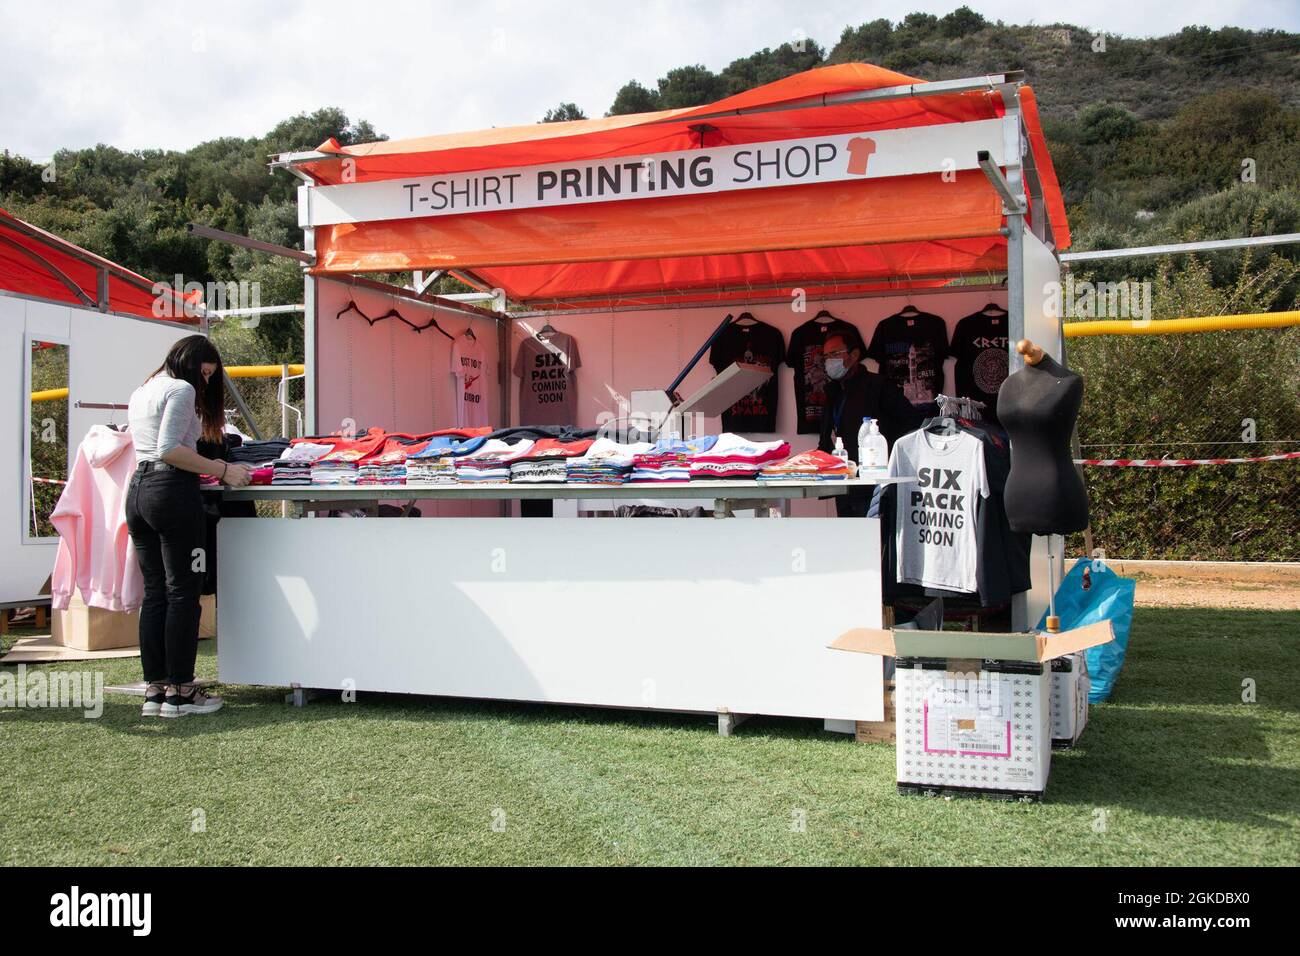 210319-N-UR565-0026 NAVAL SUPPORT ACTIVITY SOUDA BAY, Greece (March 19,  2021) A T-shirt printing pop-up store is set up for at festival created by  Naval Support Activity Souda Bay for the Sailors assigned